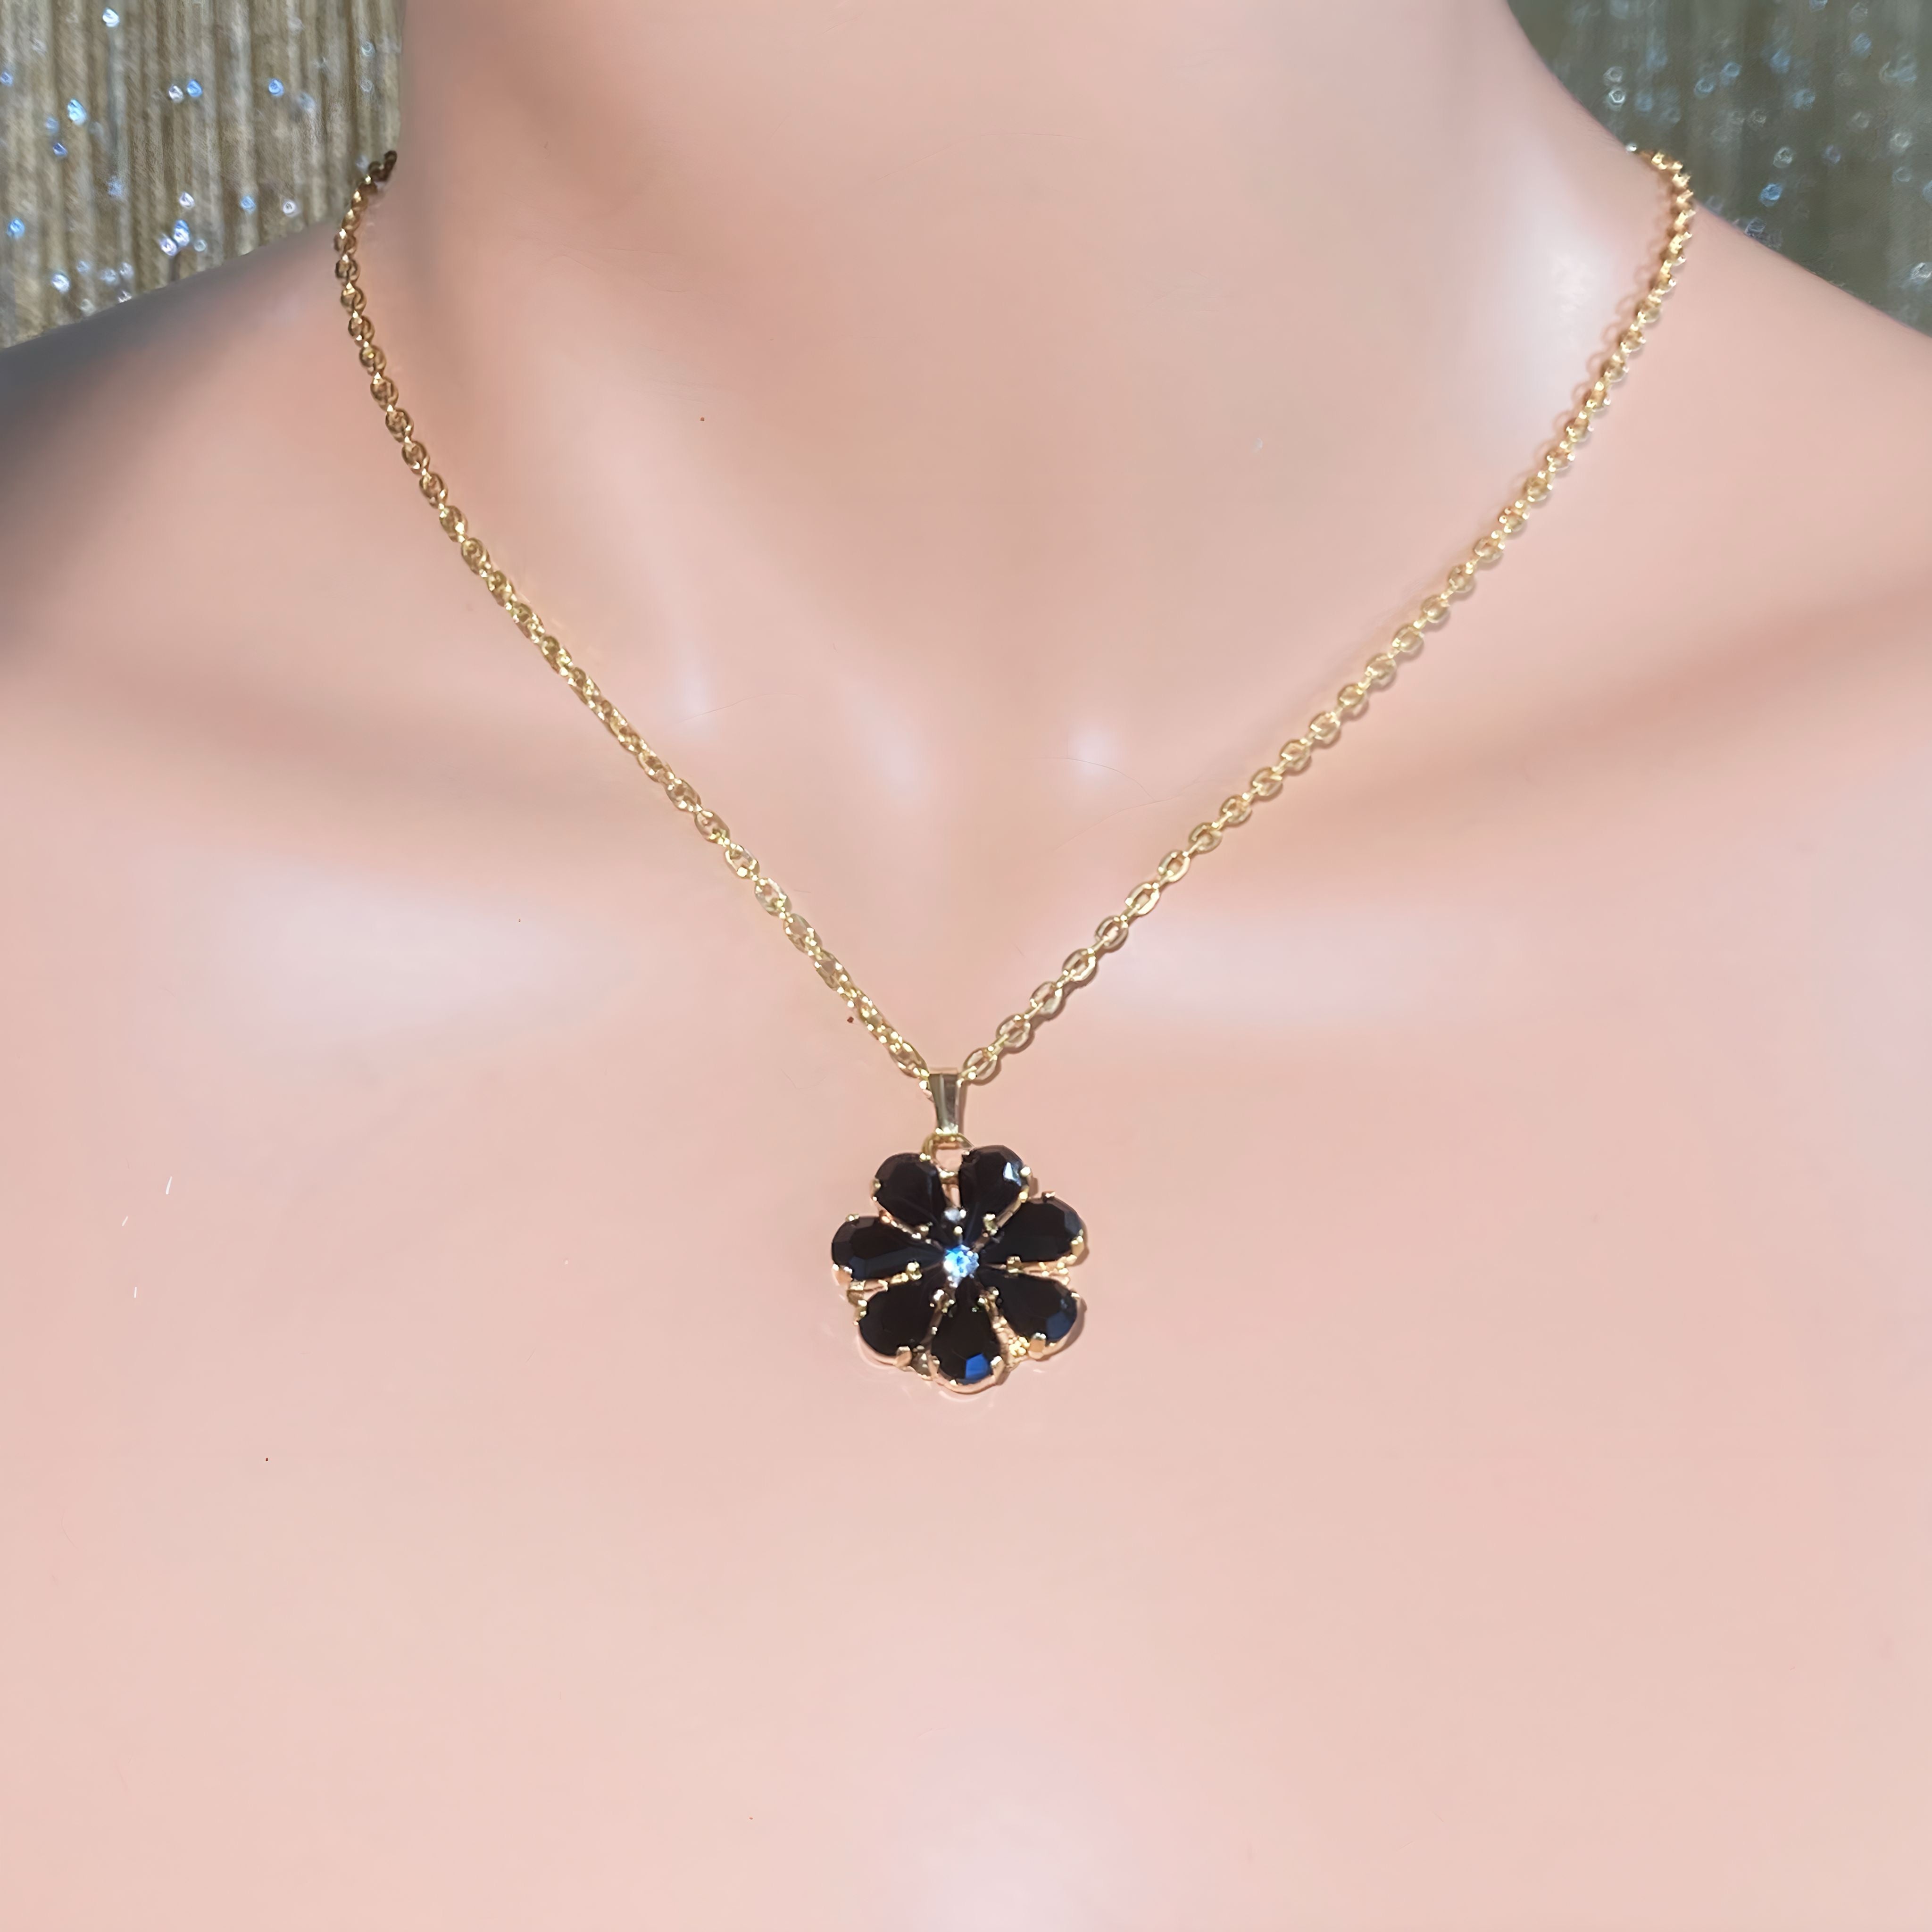 Daisy Pendant Necklace With Crystal Drops In Onyx Shades.